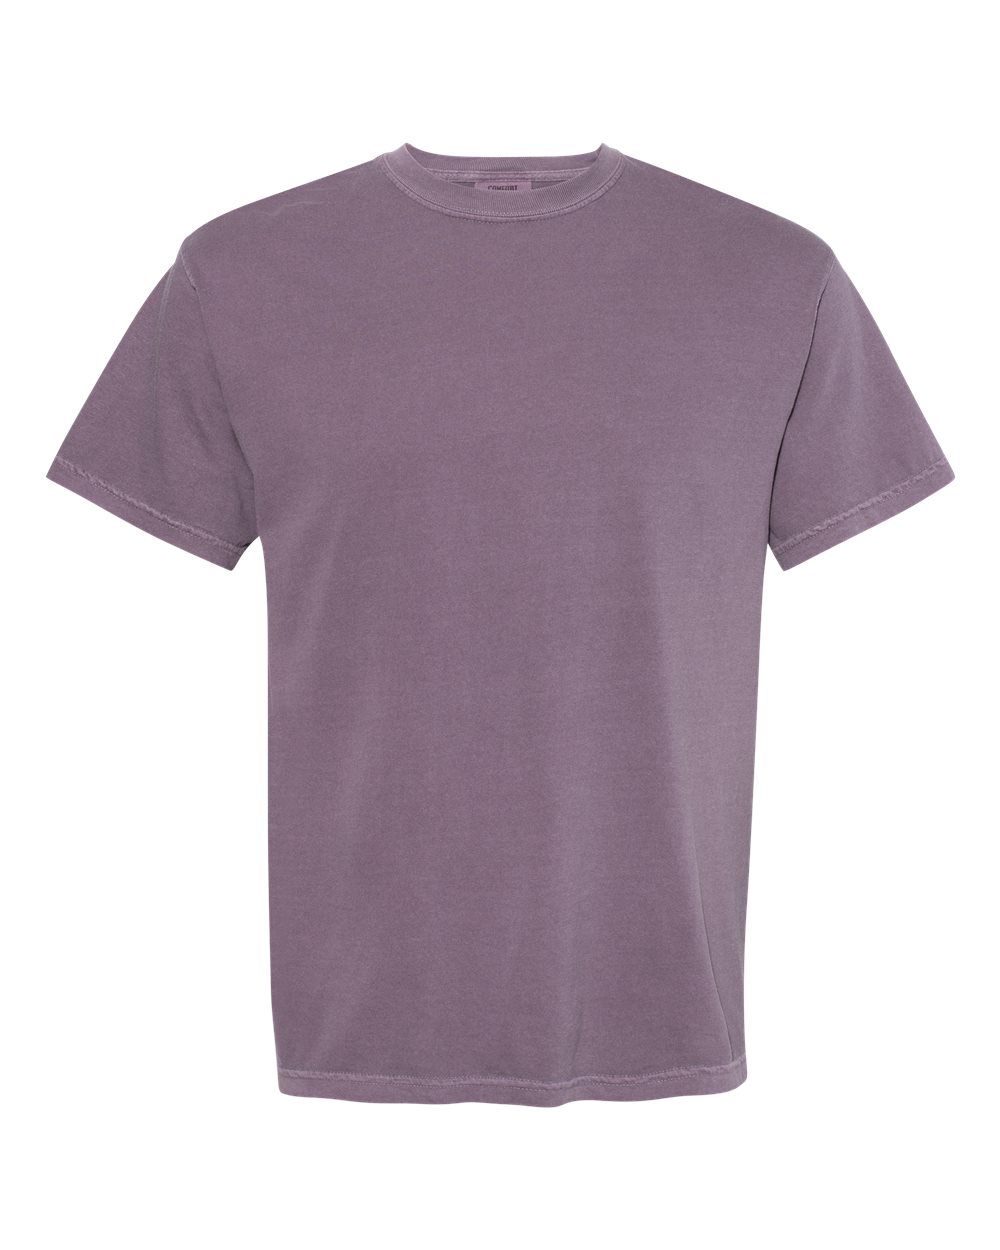 Comfort Colors Garment-Dyed Tee (1717) in Wine